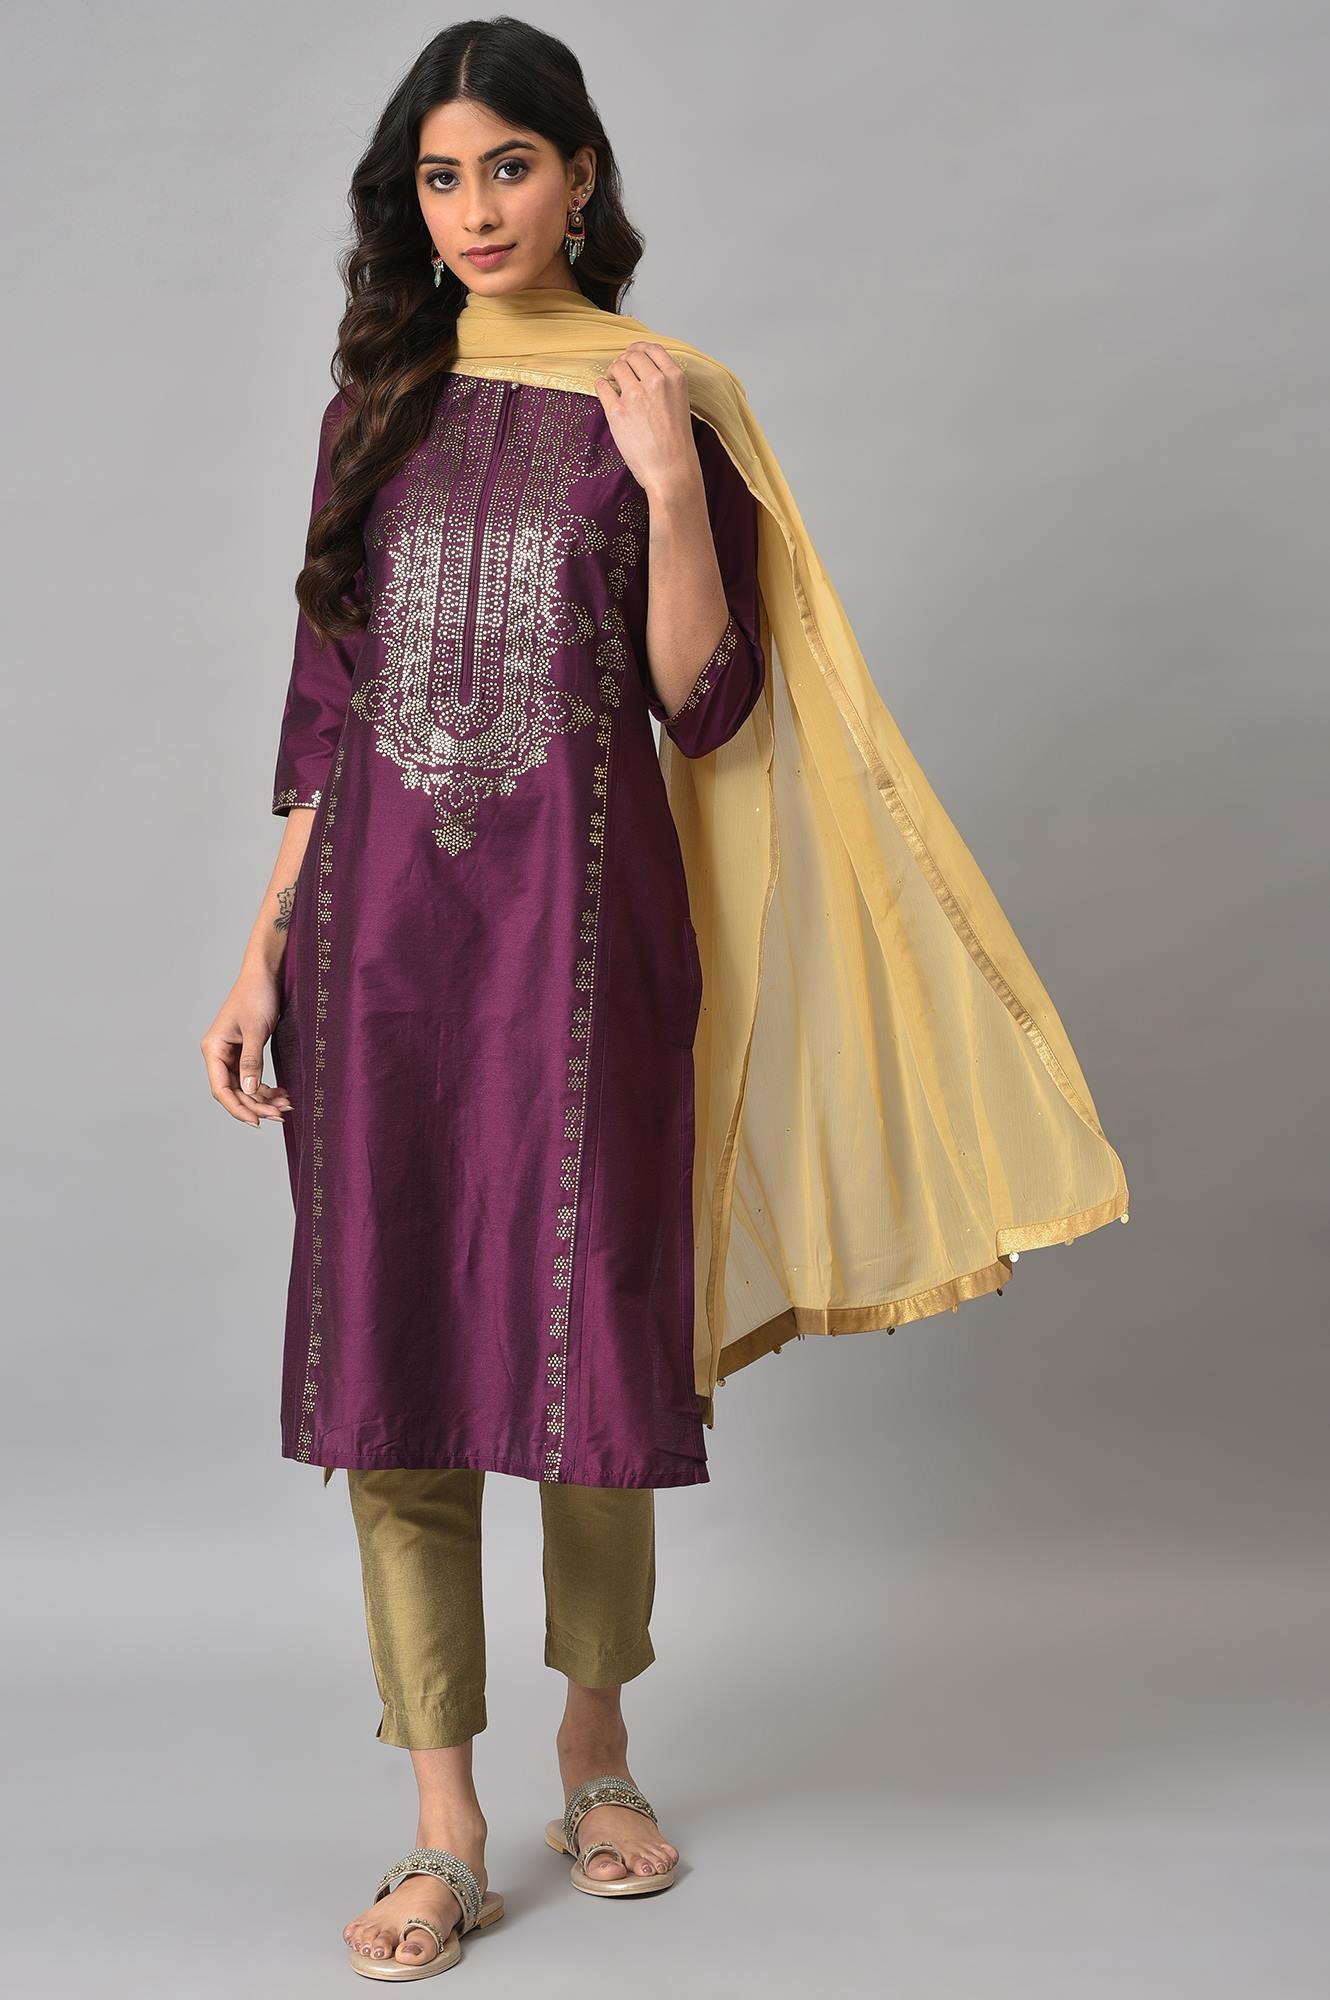 Farida Hasan Luxe Edit '23 - GOLDEN SEHR WITH PANTS AND DUPATTA – Nainpreet  - The Collective